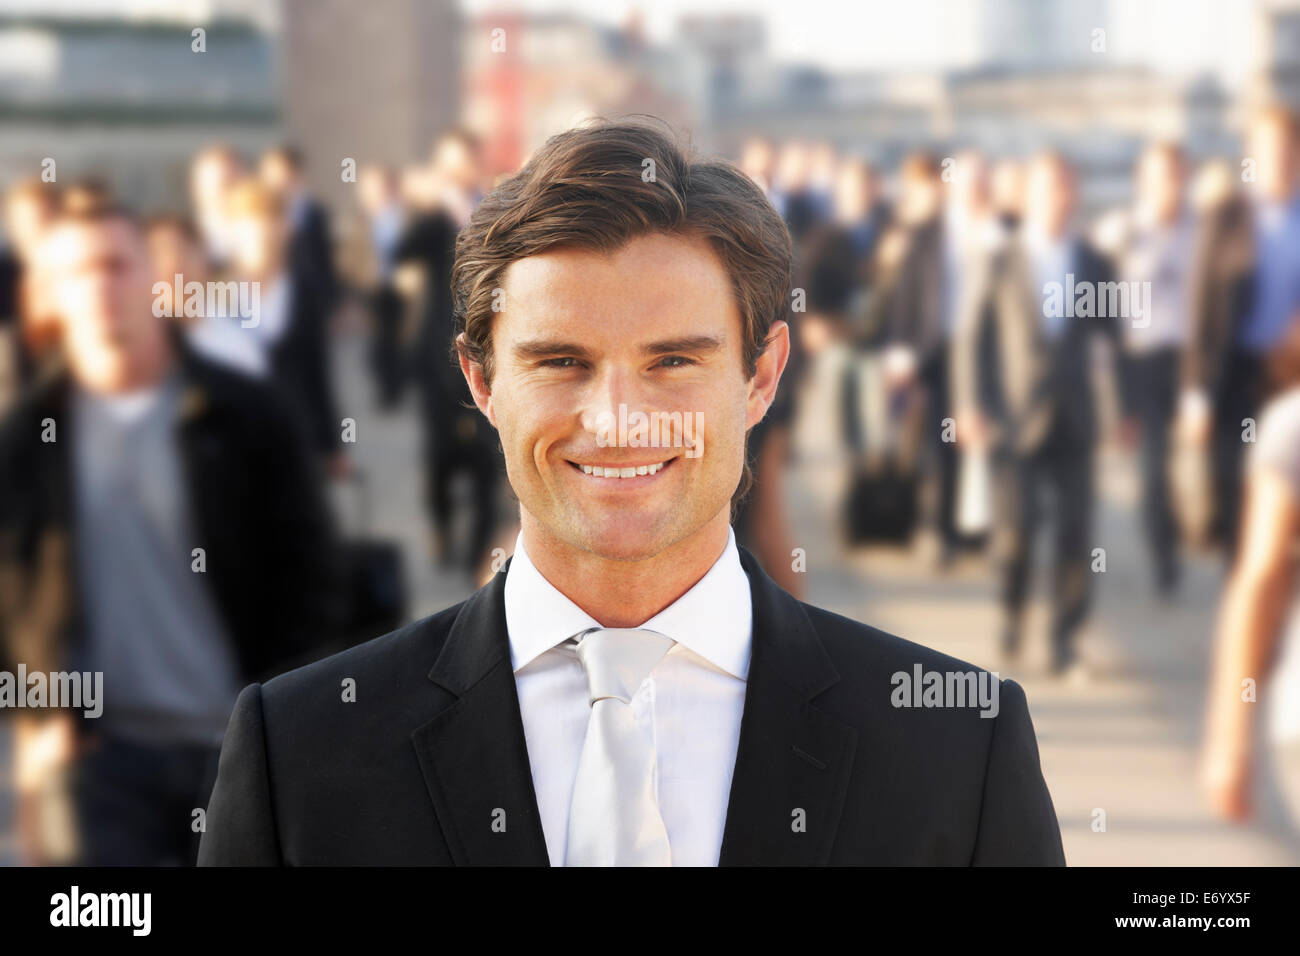 Male commuter in crowd Stock Photo